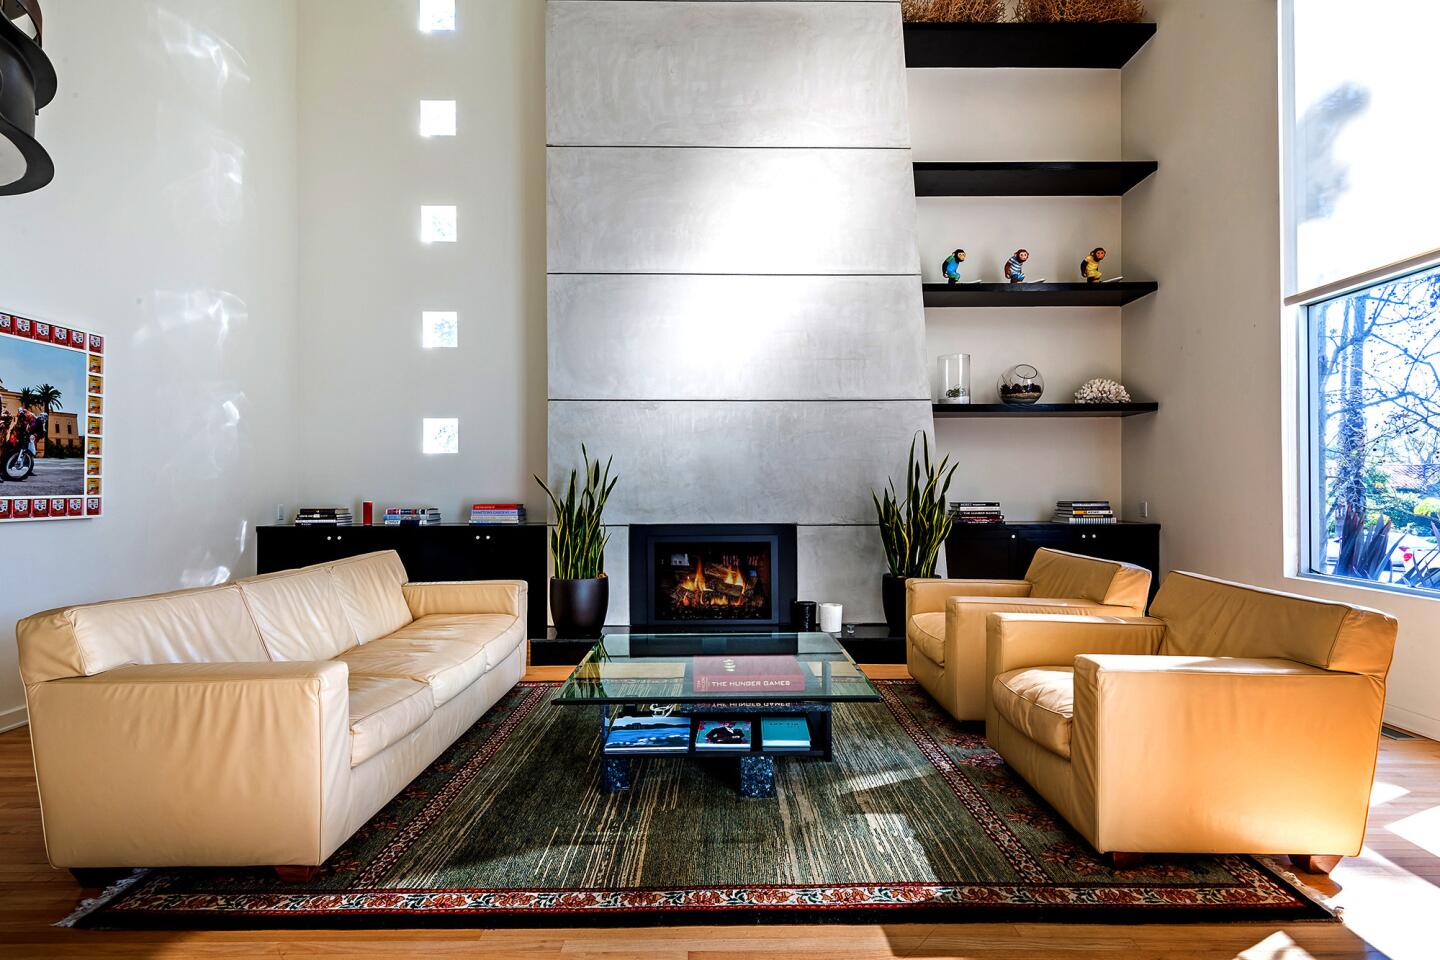 Home of the Week | Santa Monica modern is an ode to Le Corbusier